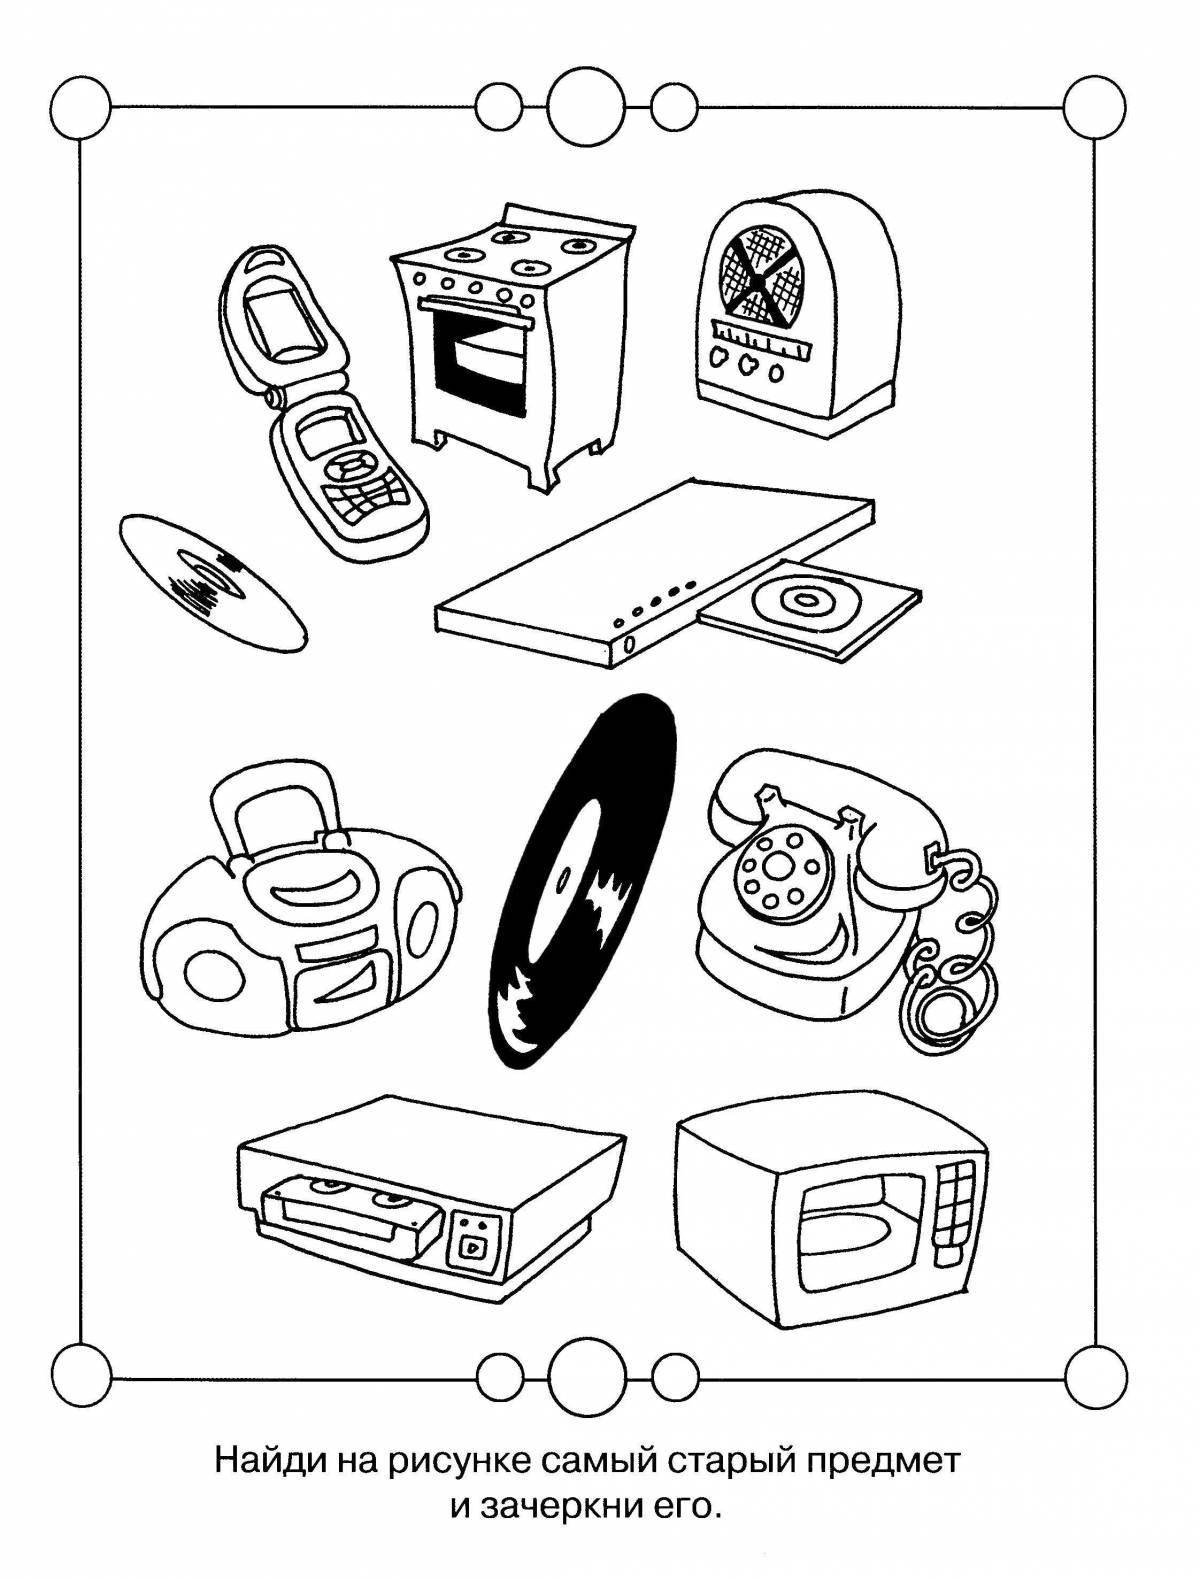 Exquisite electrical devices coloring book